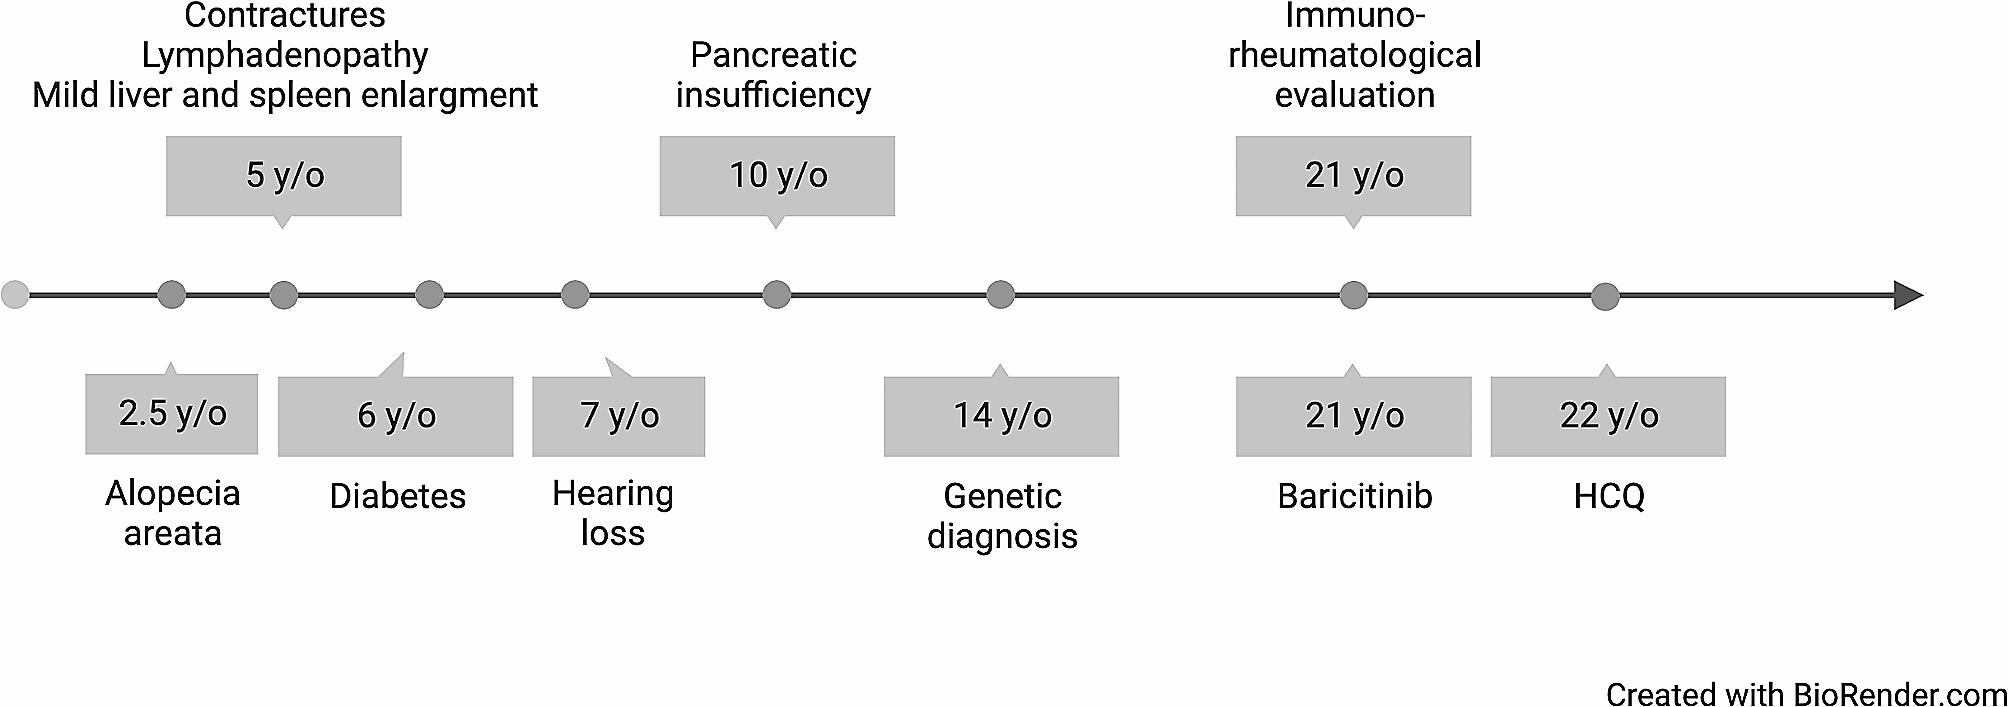 Rheumatological complaints in H syndrome: from inflammatory profiling to target treatment in a case study